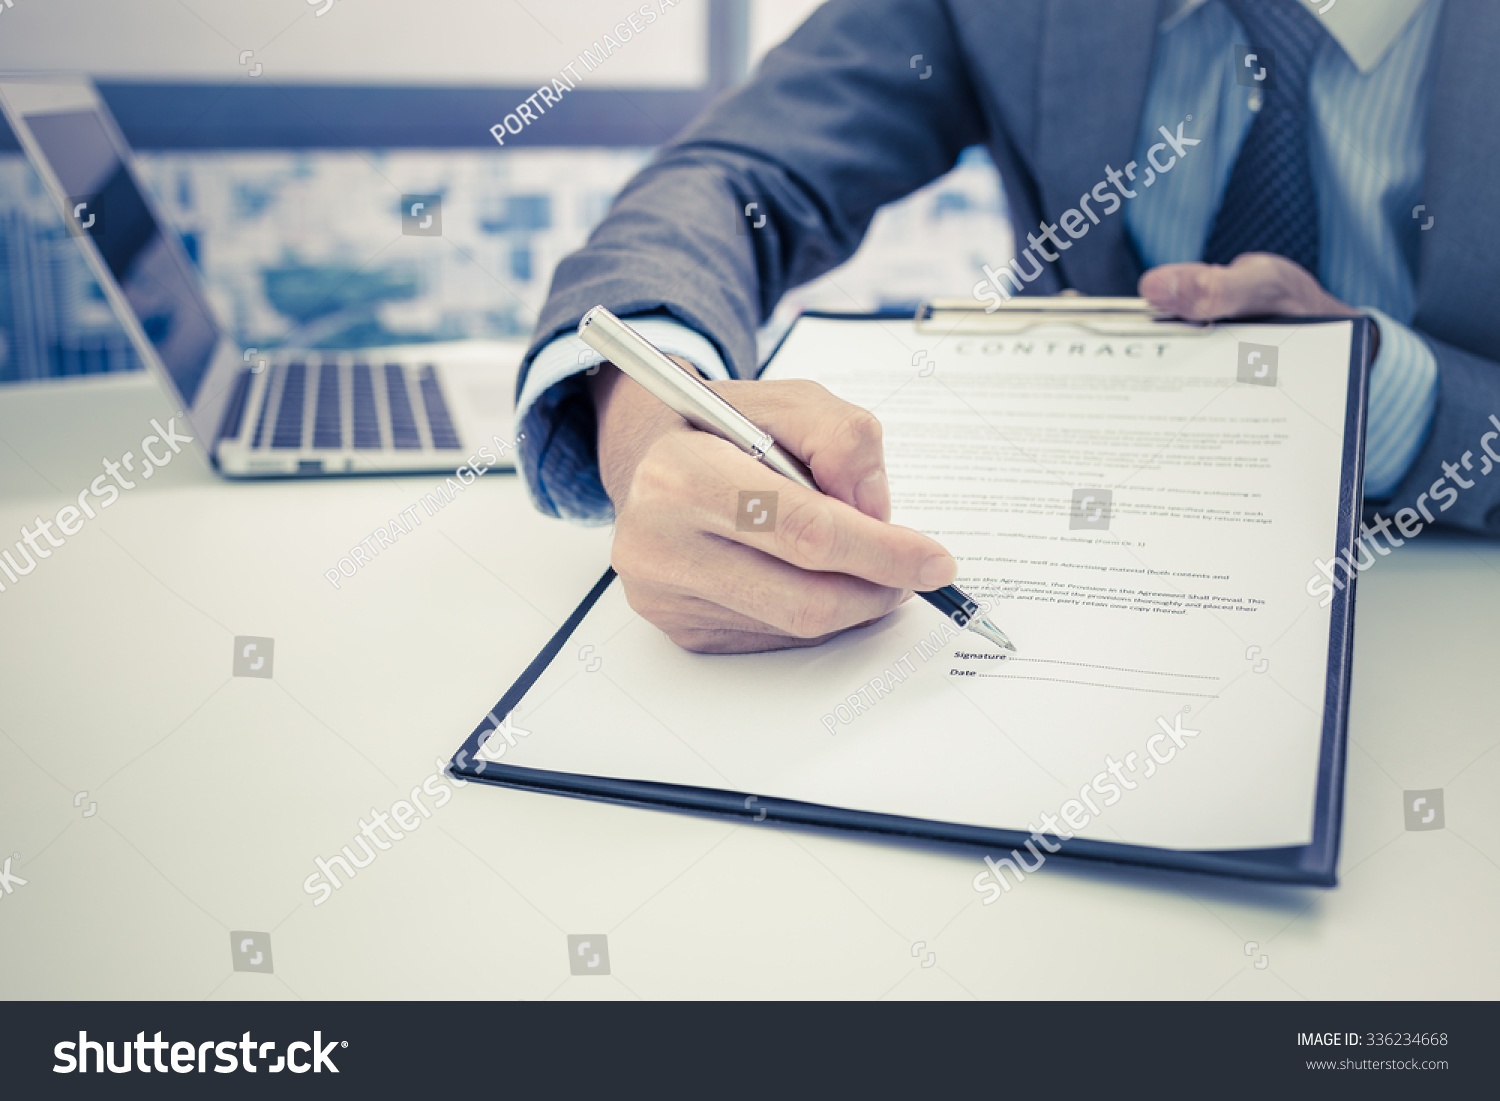 Business man signing a contract #336234668